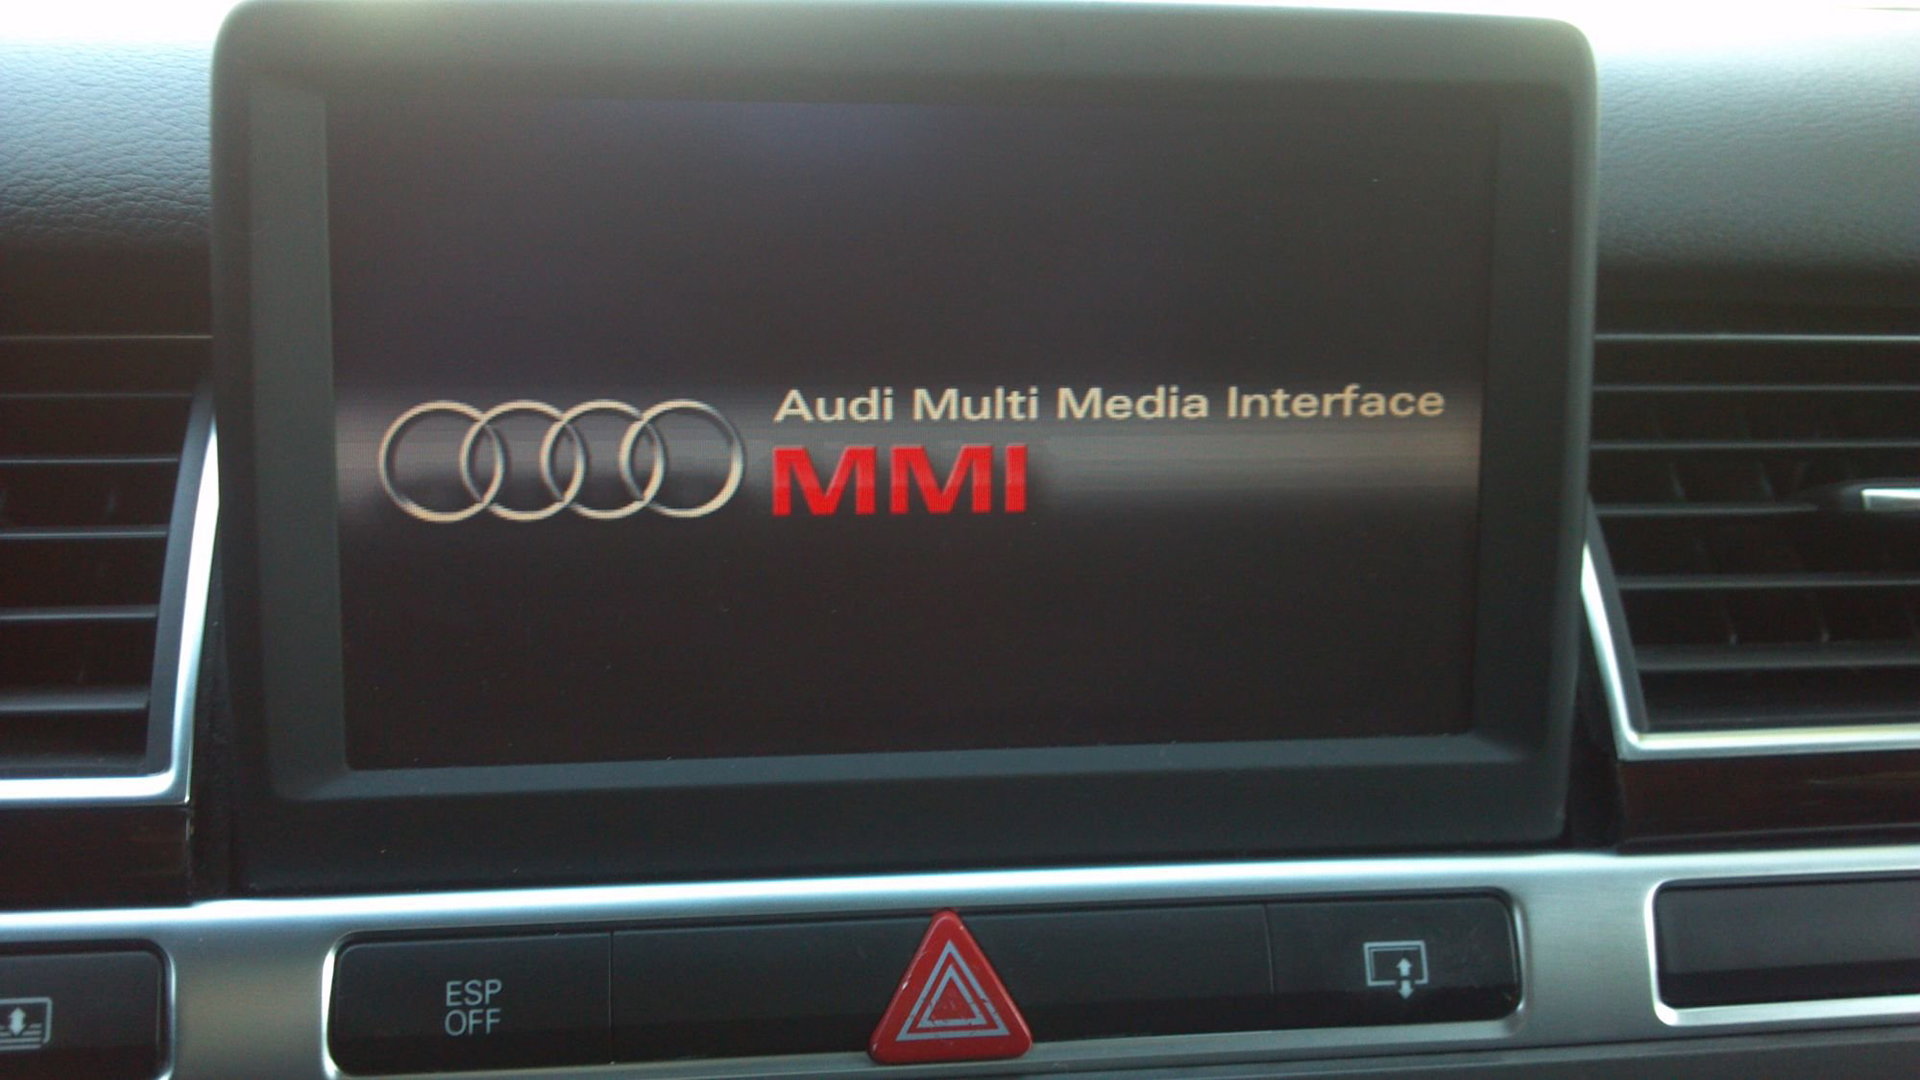 LCD Navigation Multimedia MMI Interface Display Screen For AUDI A4 A5 A6 Q7 RS6